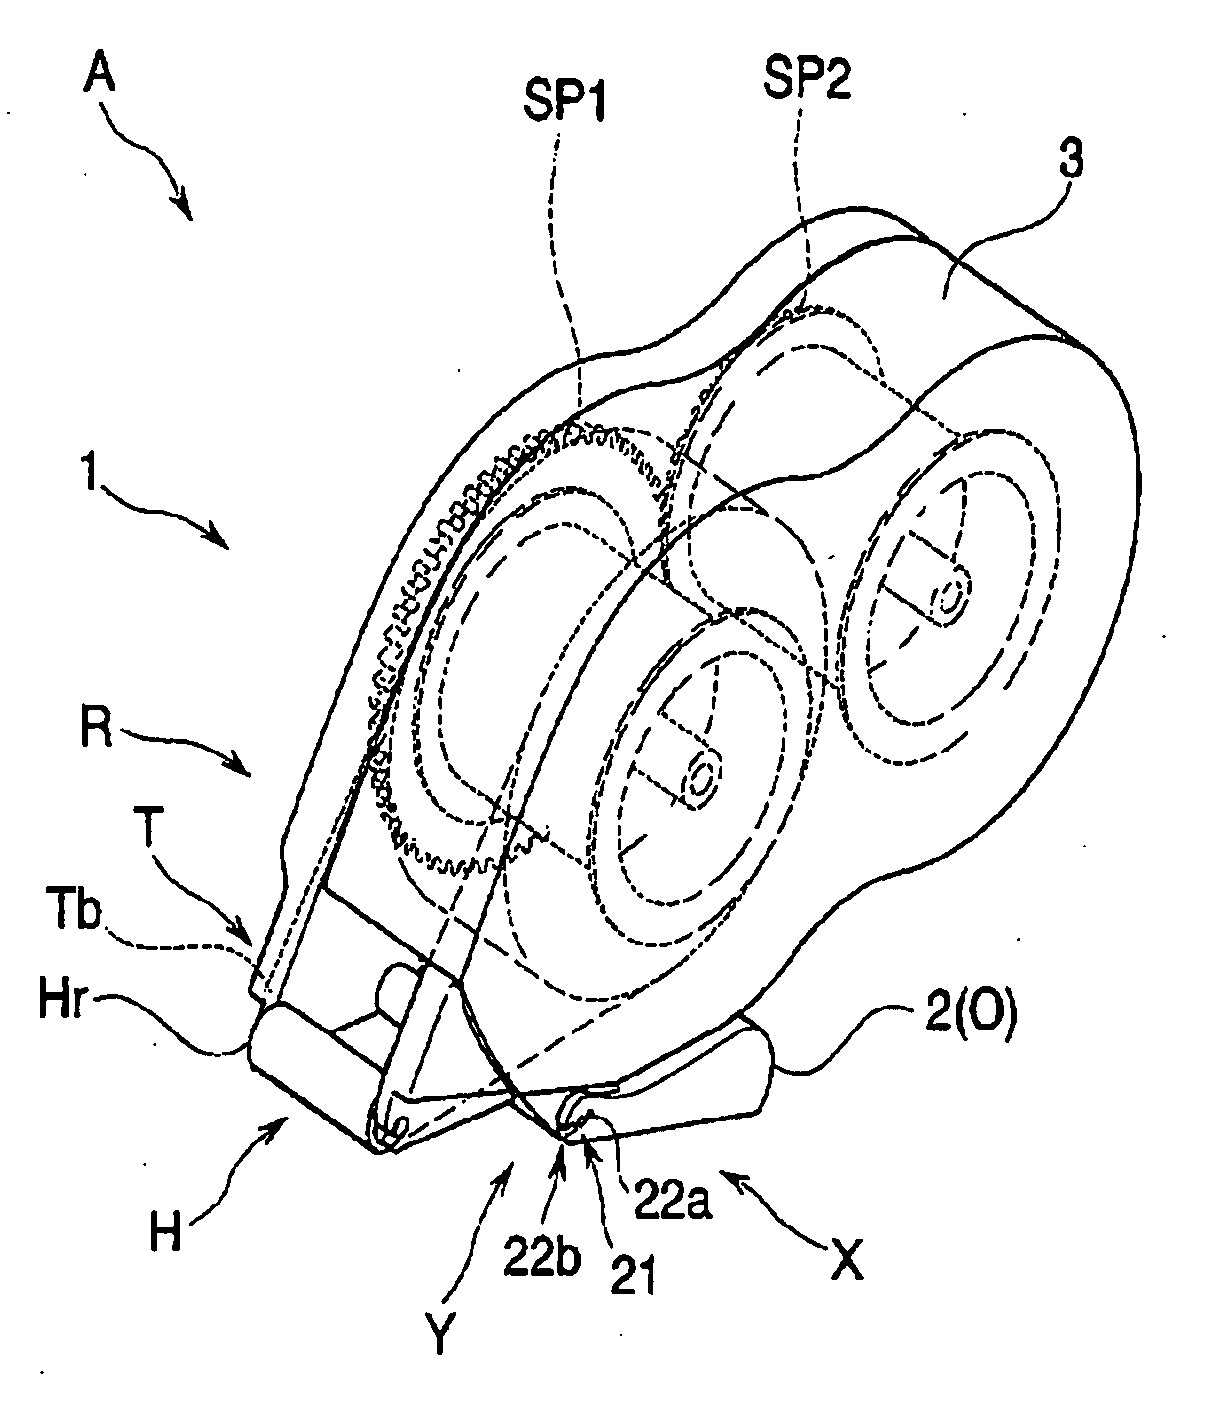 Latching structure for cover and transfer tool